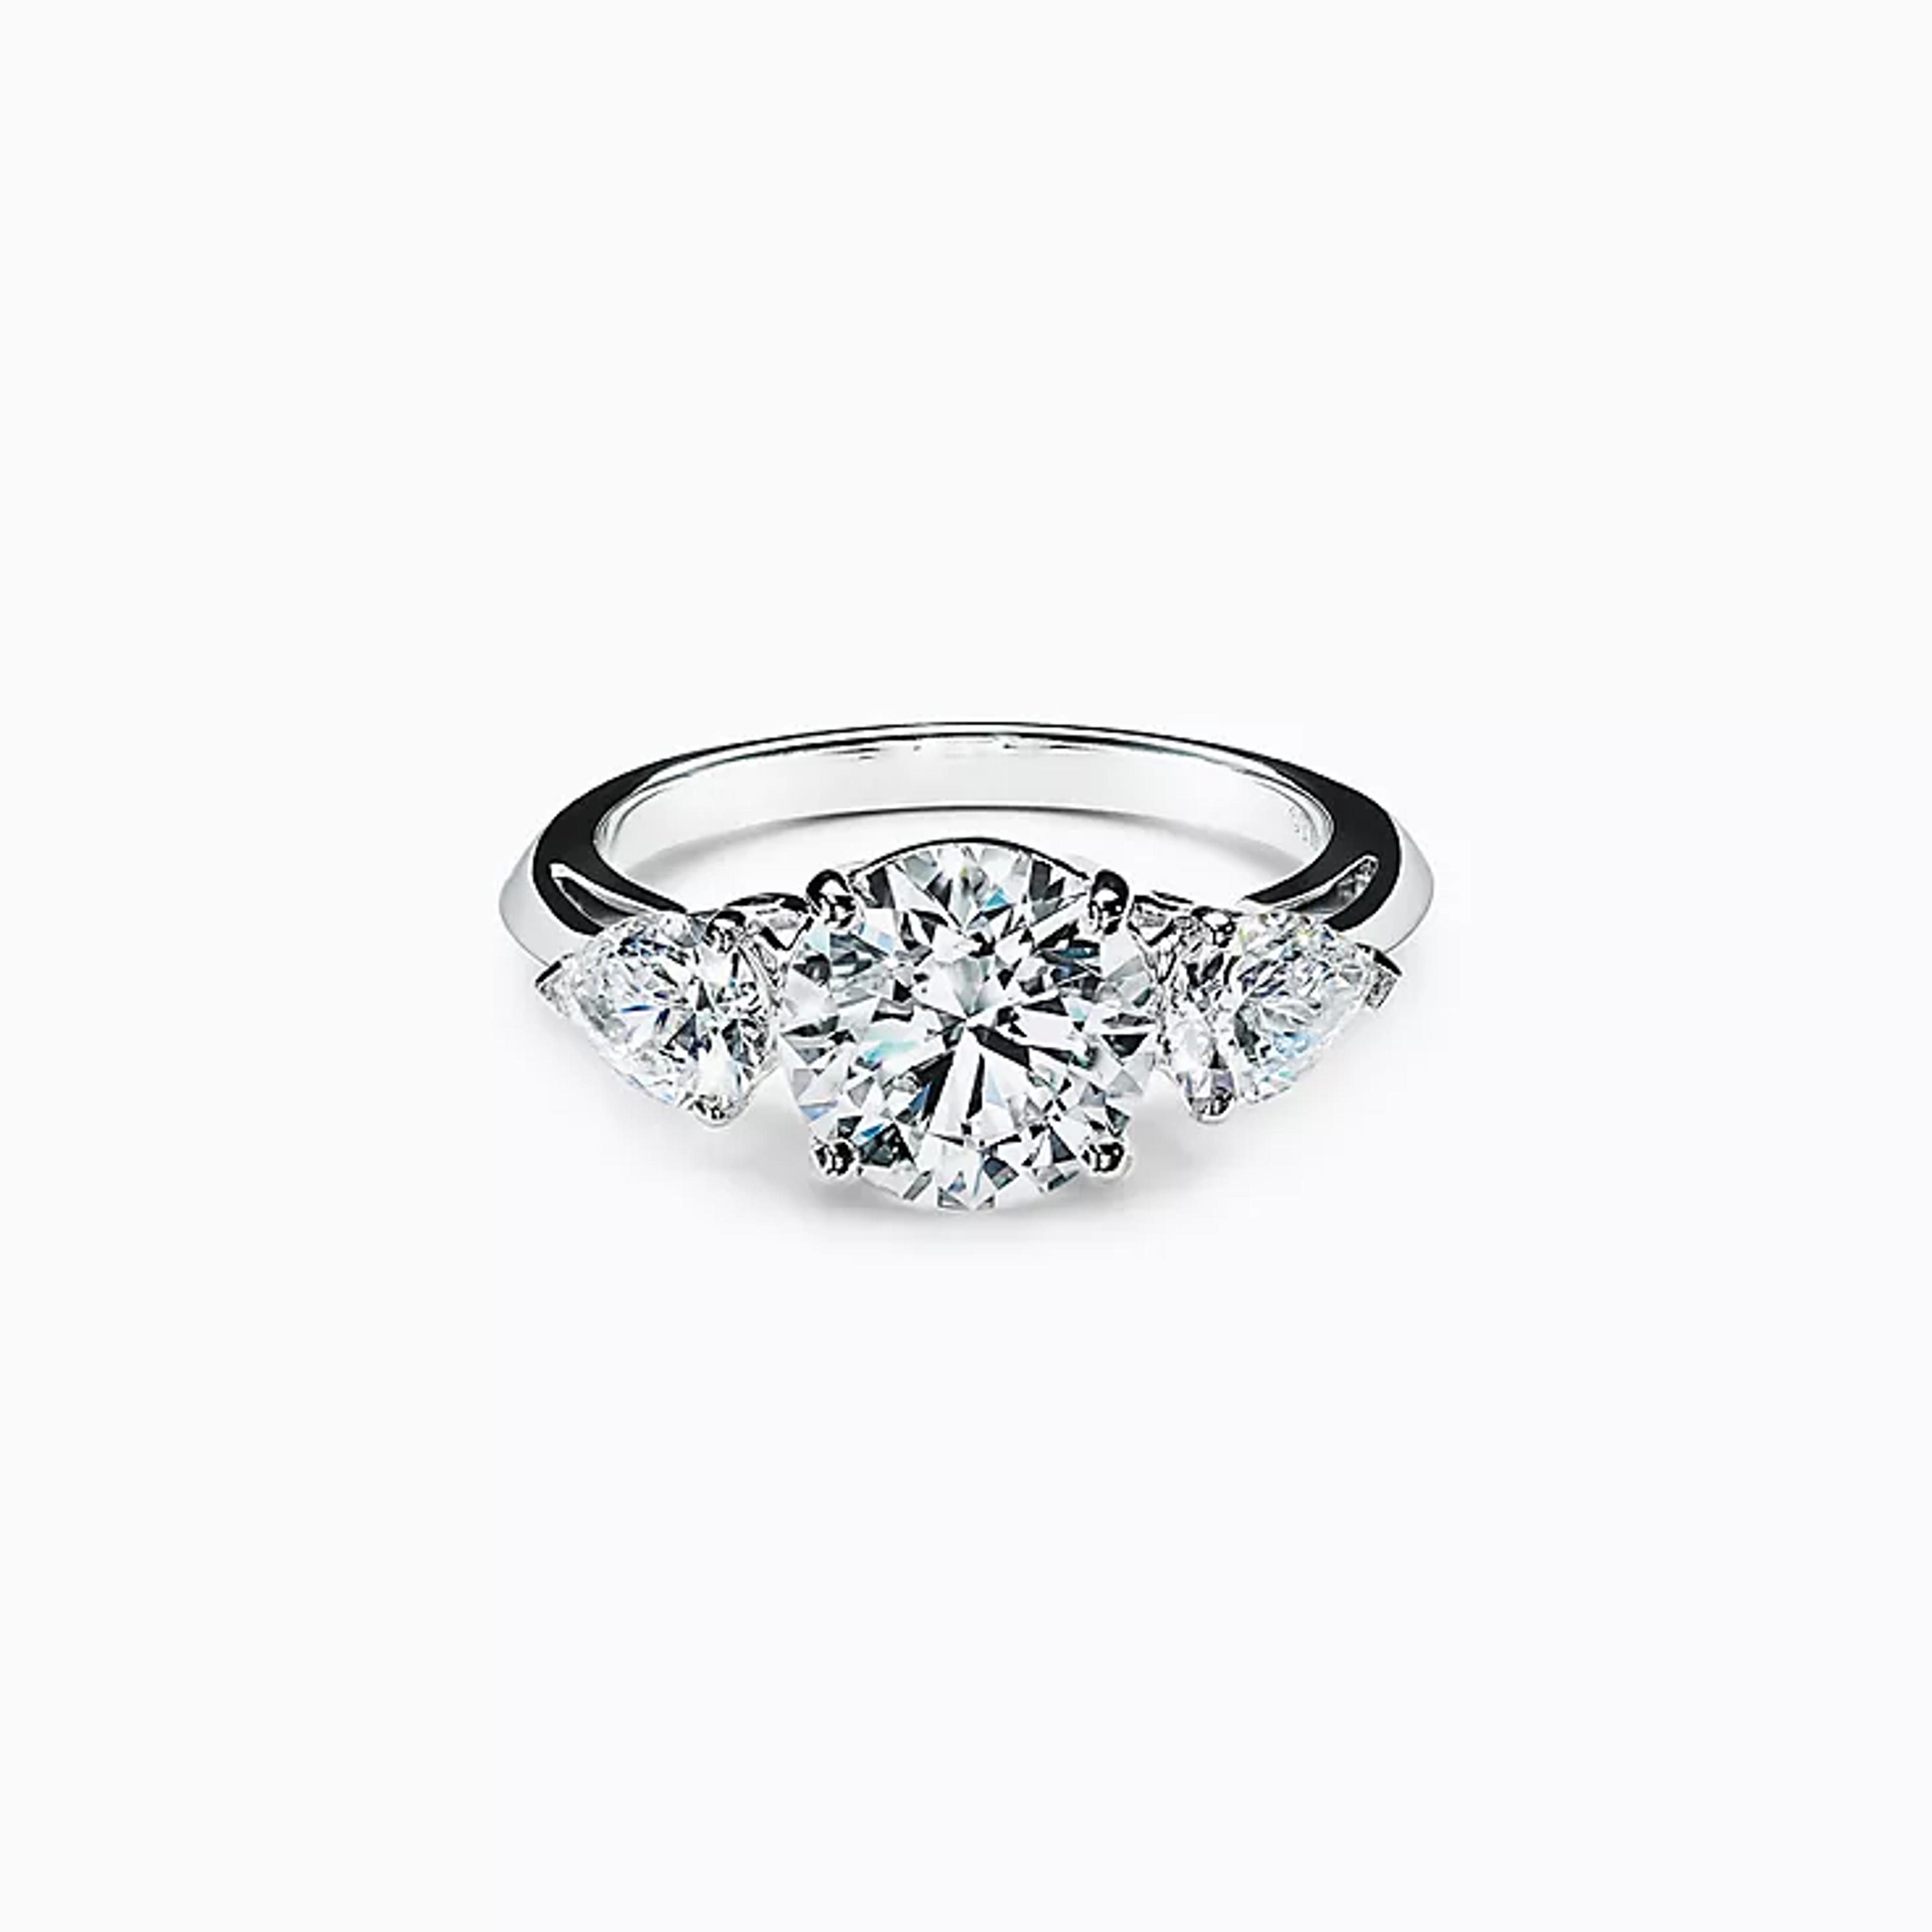 Tiffany Three Stone engagement ring with pear-shaped side stones in platinum. | Tiffany & Co.